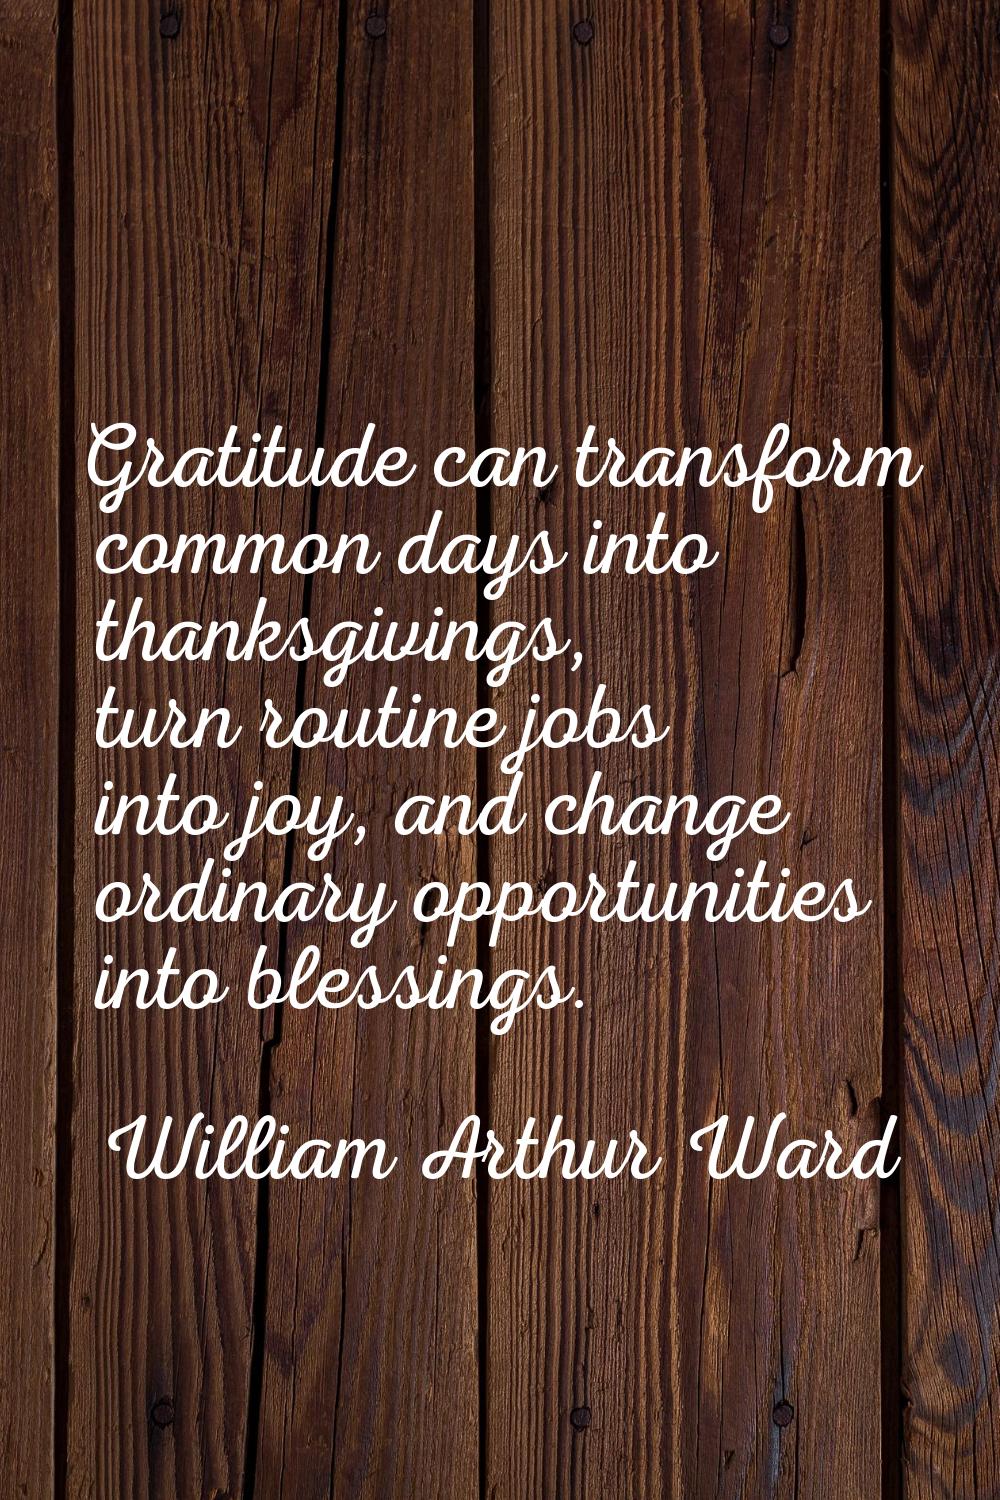 Gratitude can transform common days into thanksgivings, turn routine jobs into joy, and change ordi